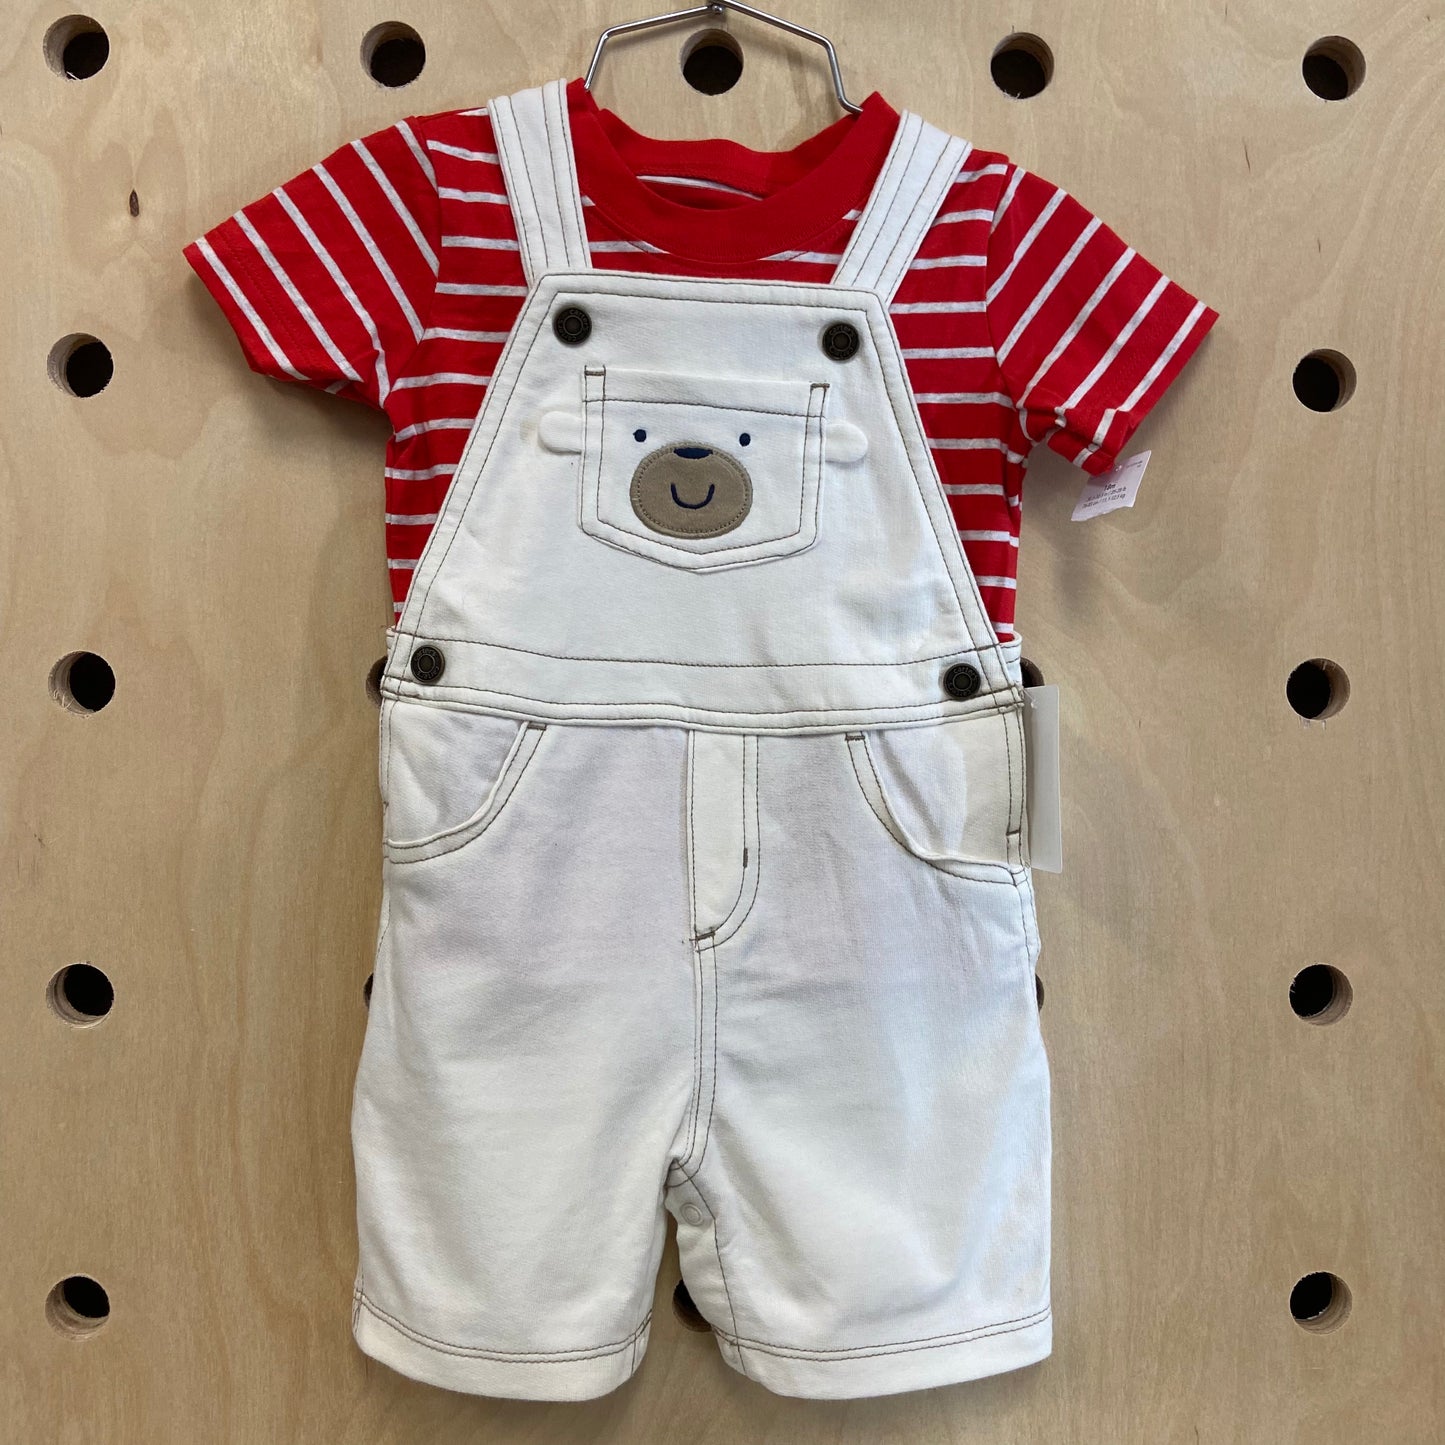 Red + White Overalls Outfit